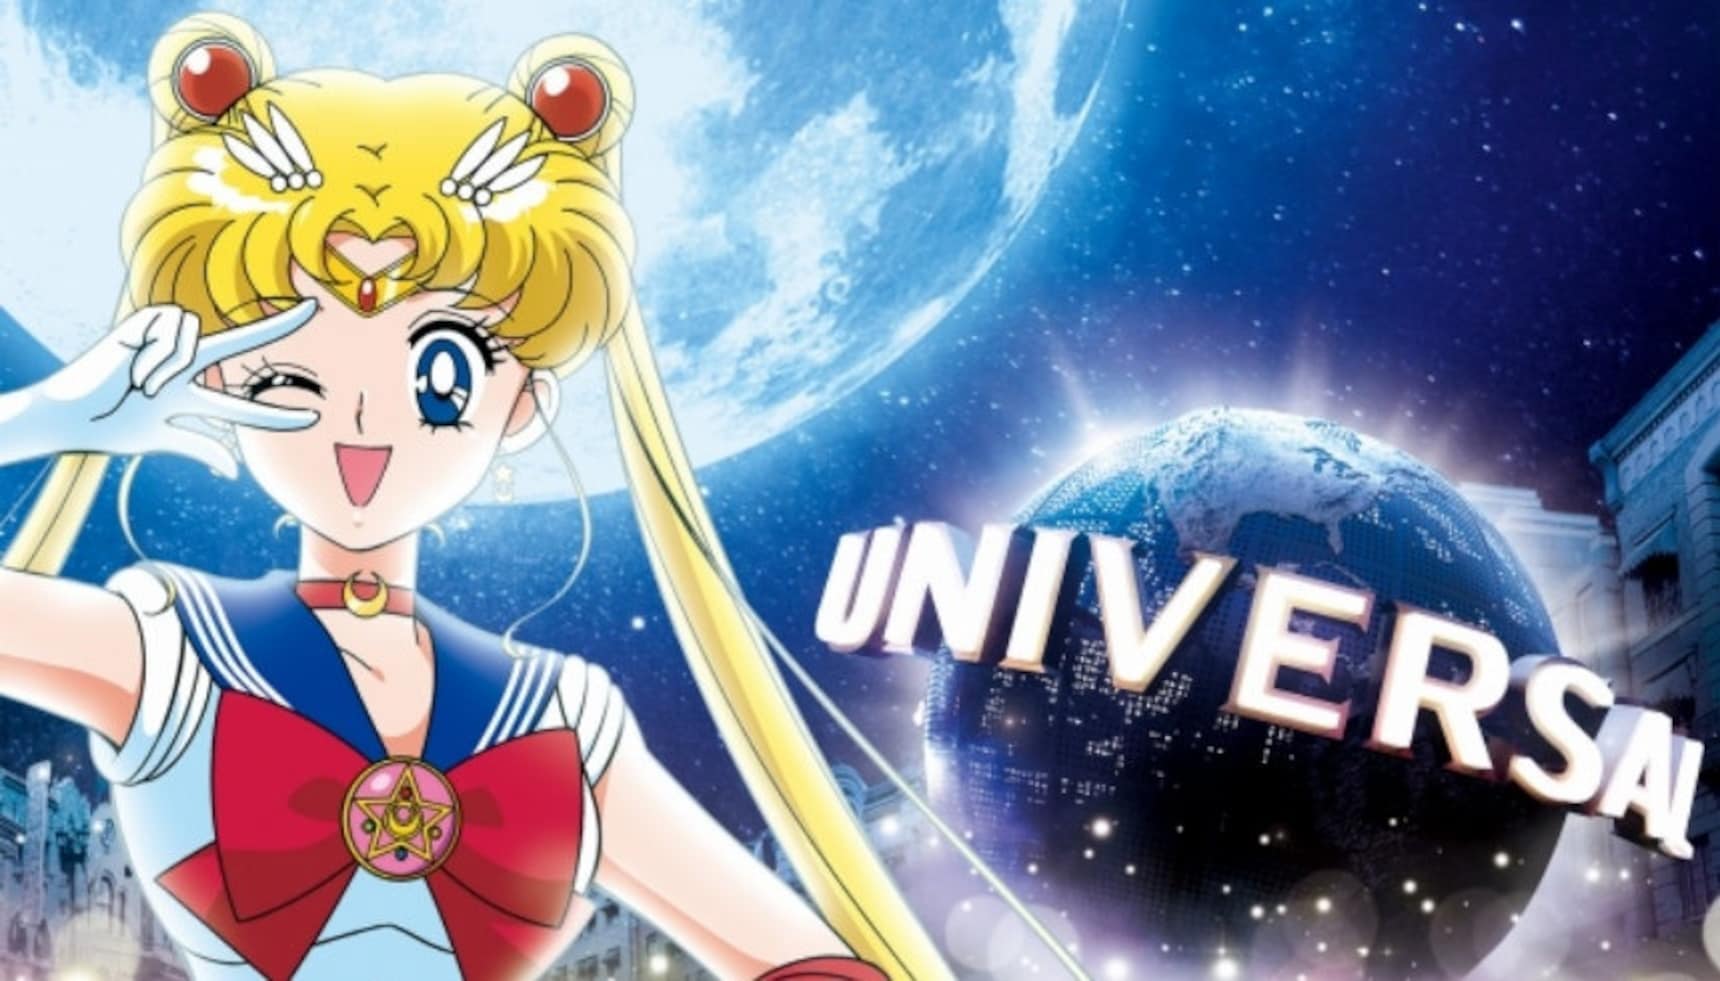 Catch a Glimpse of the Sailor Moon Ride at USJ